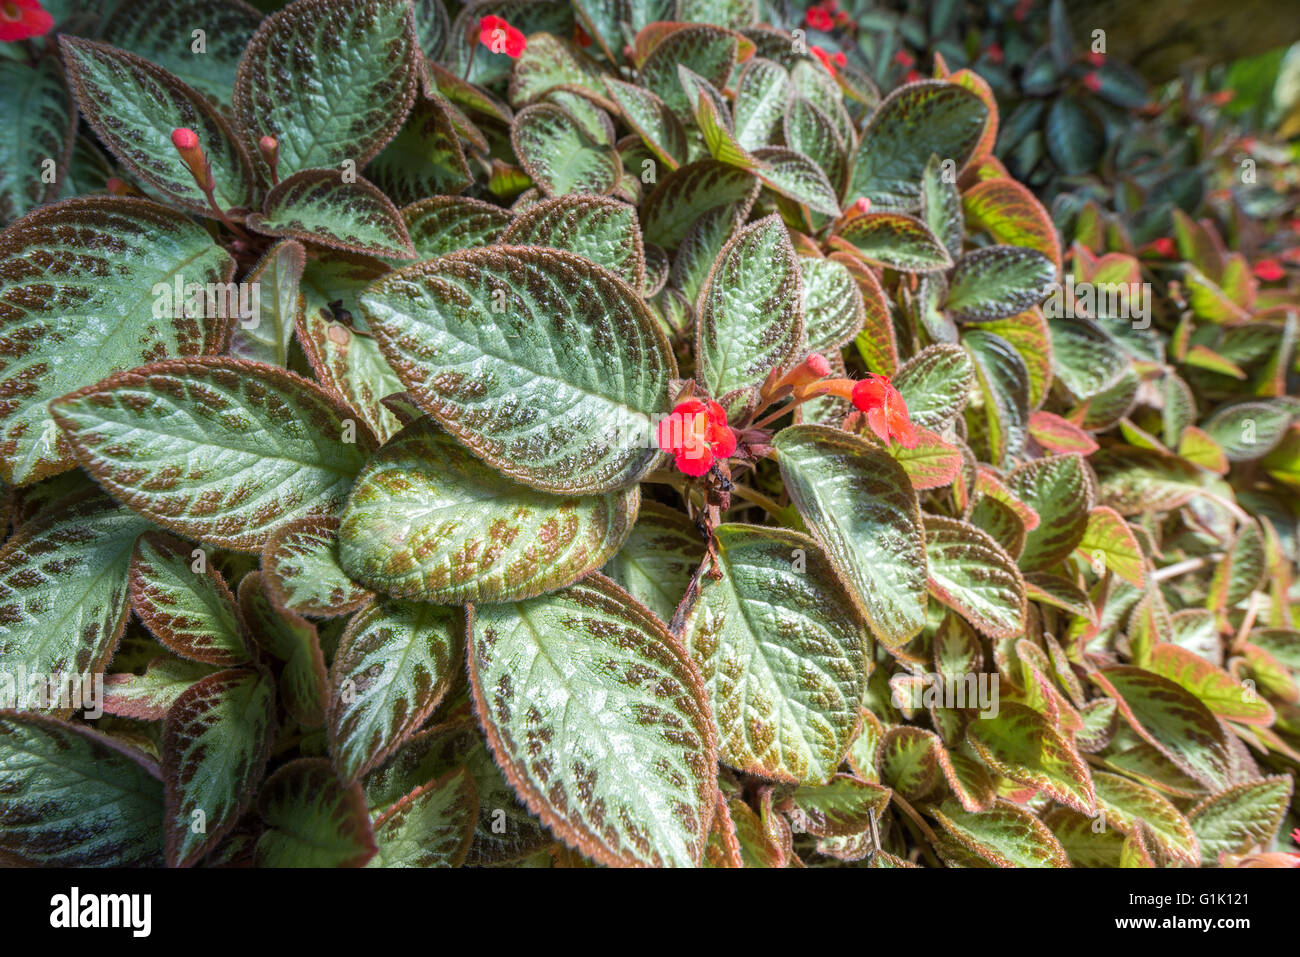 Small red flowers on plant with green leaves Stock Photo